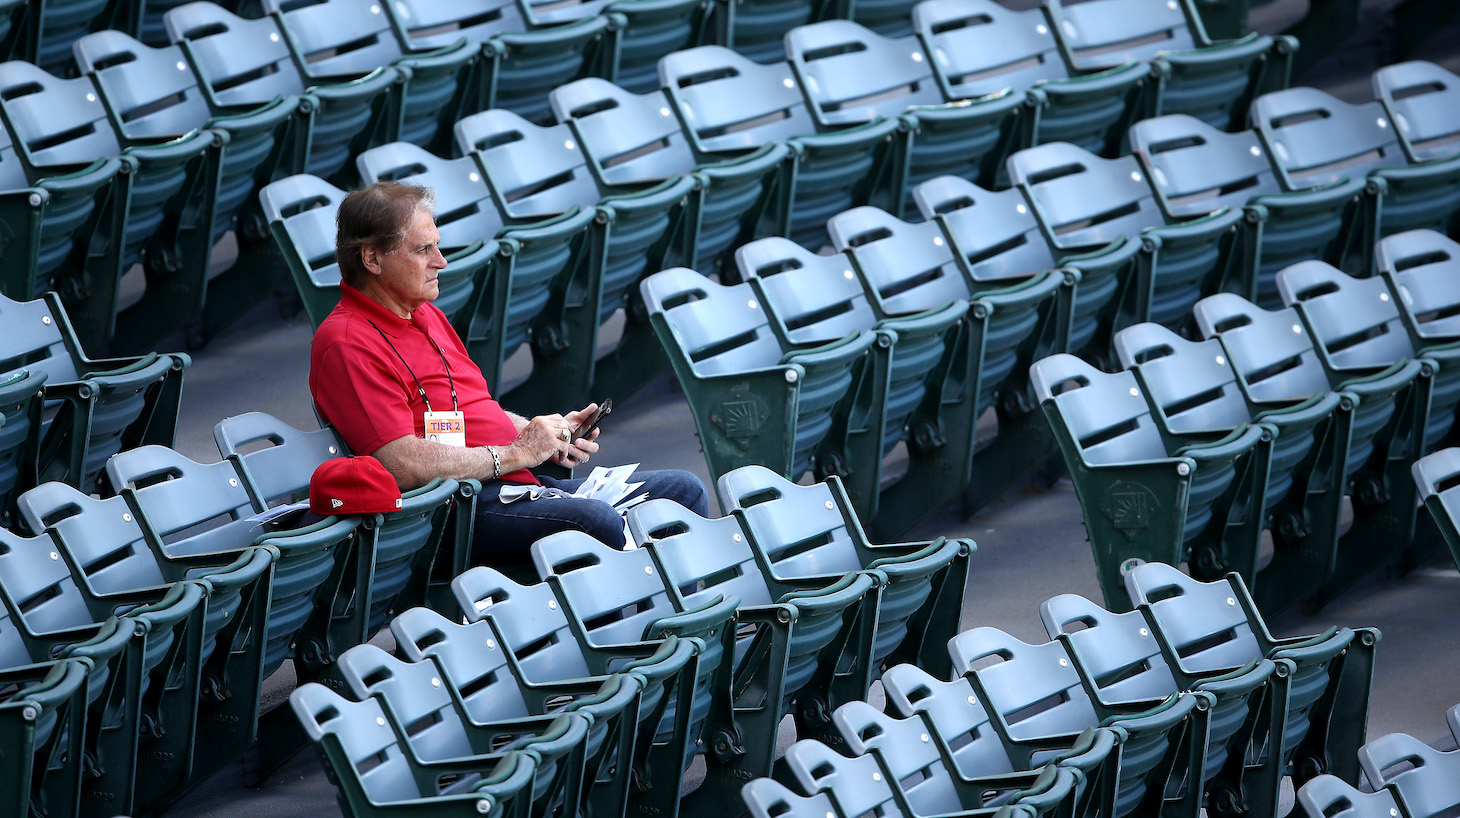 ANAHEIM, CALIFORNIA - JULY 08: Special Advisor Tony La Russa of the Los Angeles Angels looks on during their summer workout at Angel Stadium of Anaheim on July 08, 2020 in Anaheim, California. (Photo by Sean M. Haffey/Getty Images)